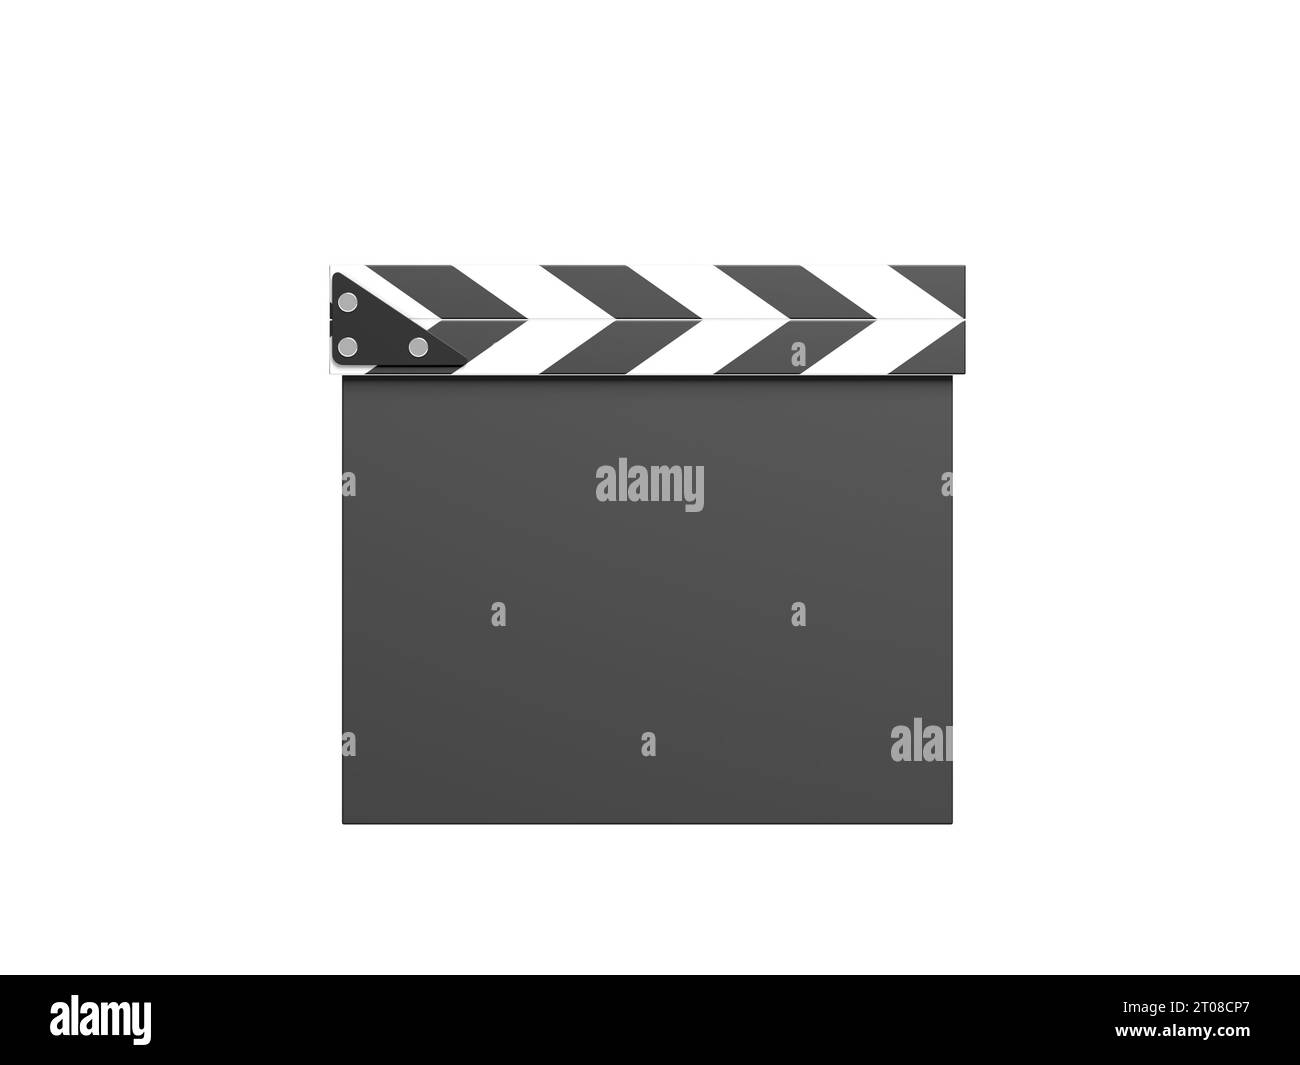 Blank clapperboard isolated on white background. 3d illustration. Stock Photo